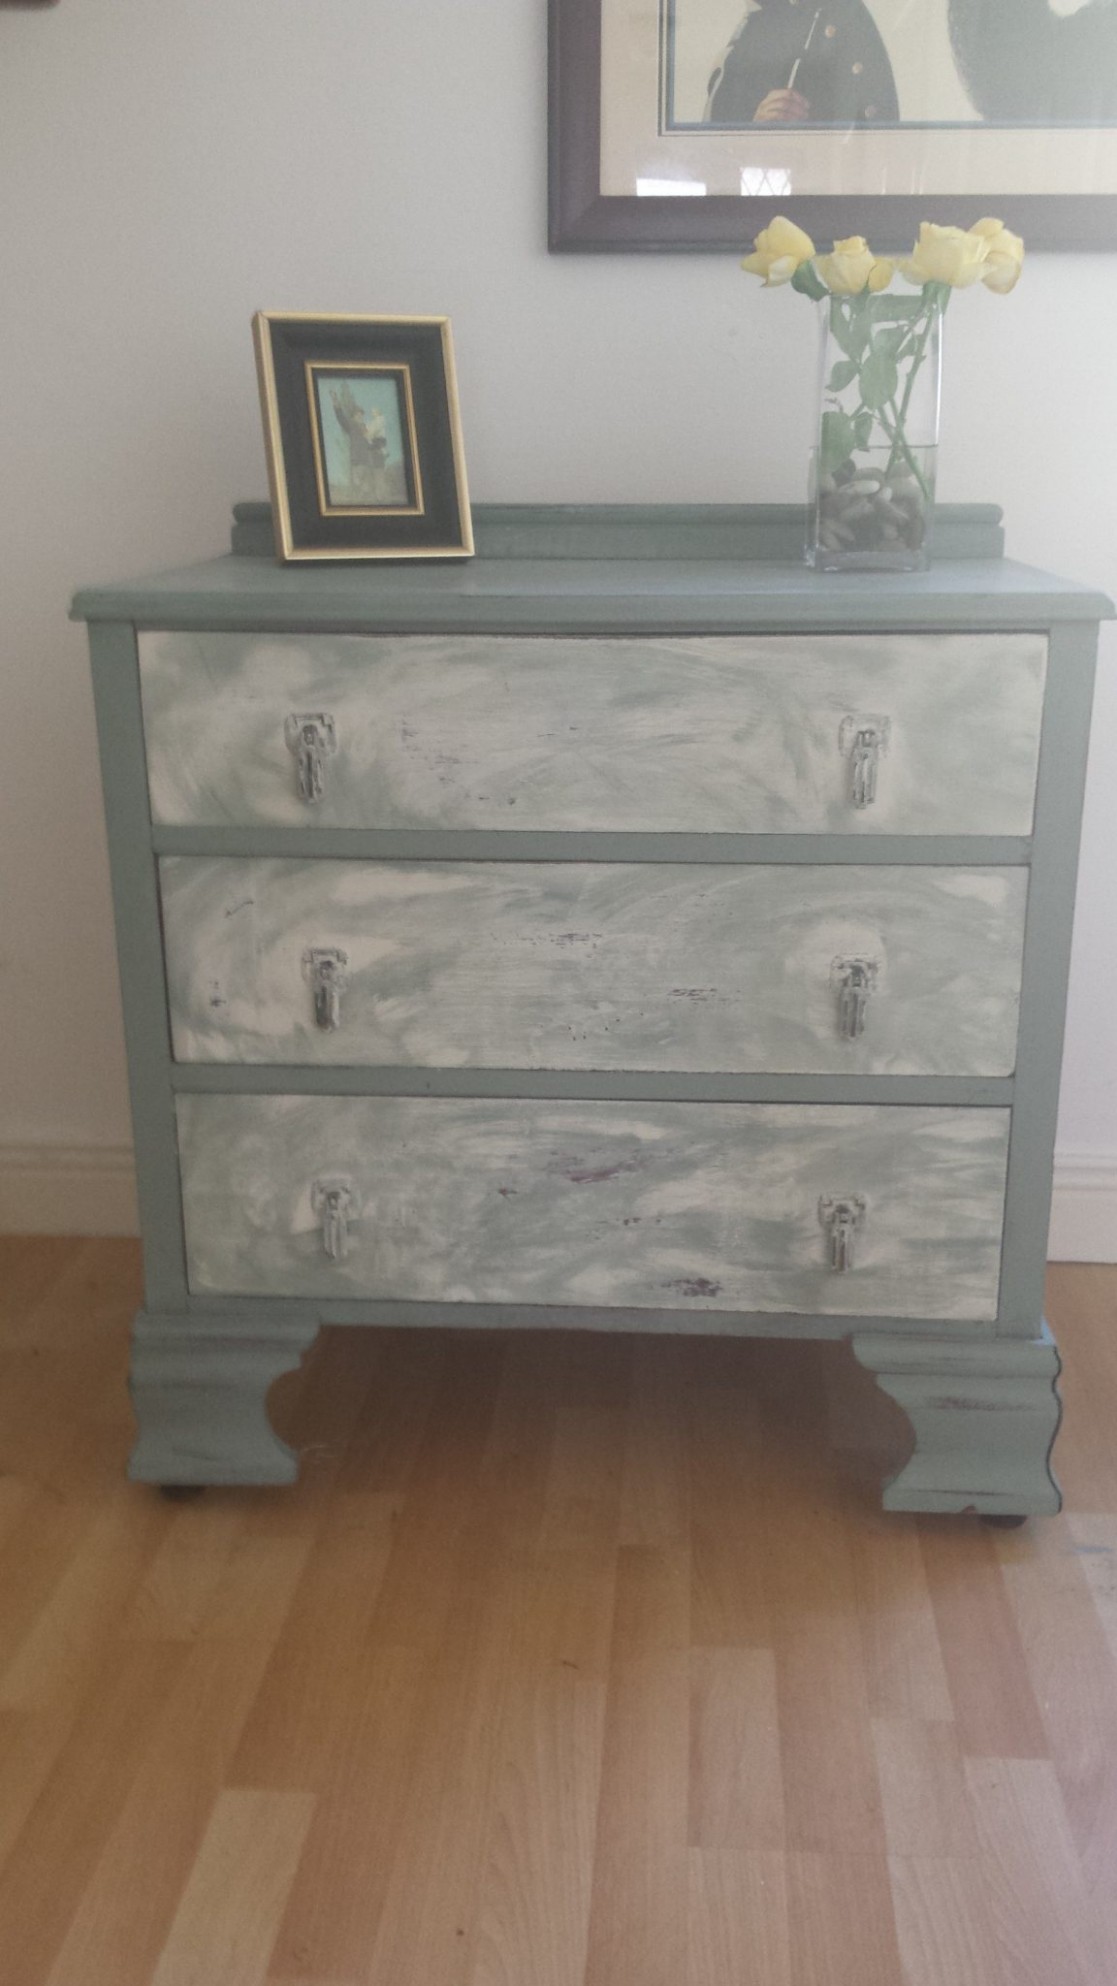 Chalk Paint Up Cycling Furniture Irish Nomad Where To Buy Chalk Paint In Australia